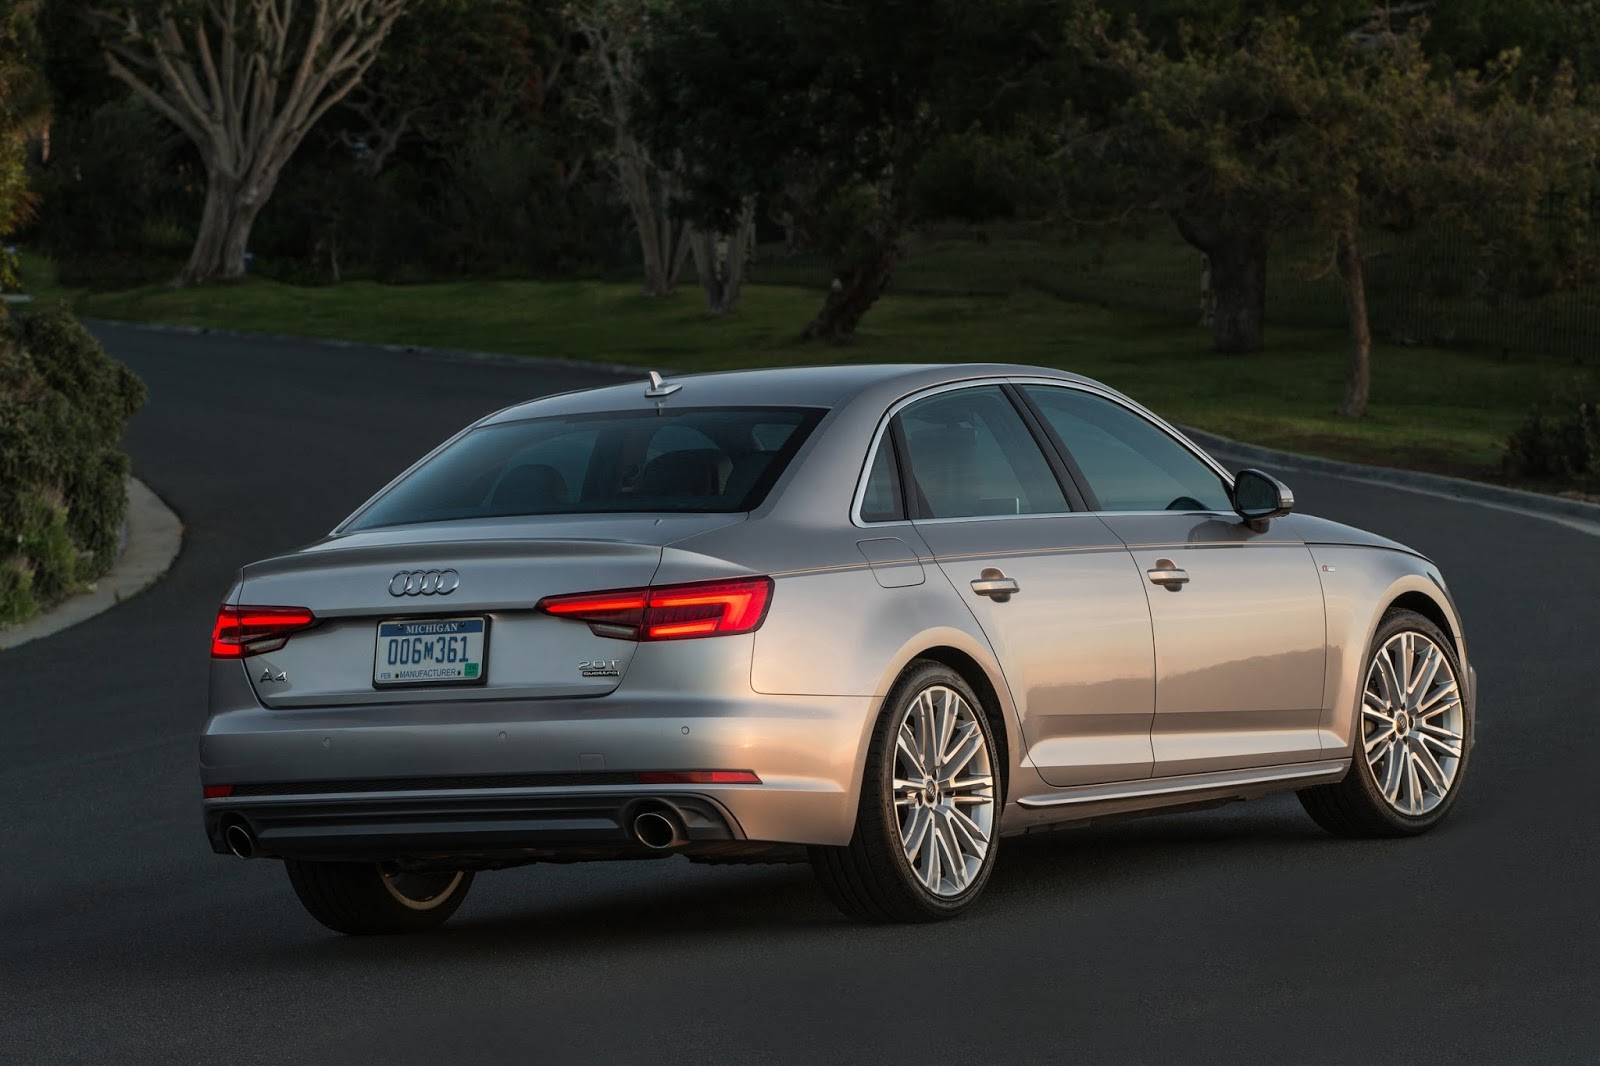 The Motoring World: USA - The 2017 Audi A4 with 6-speed manual